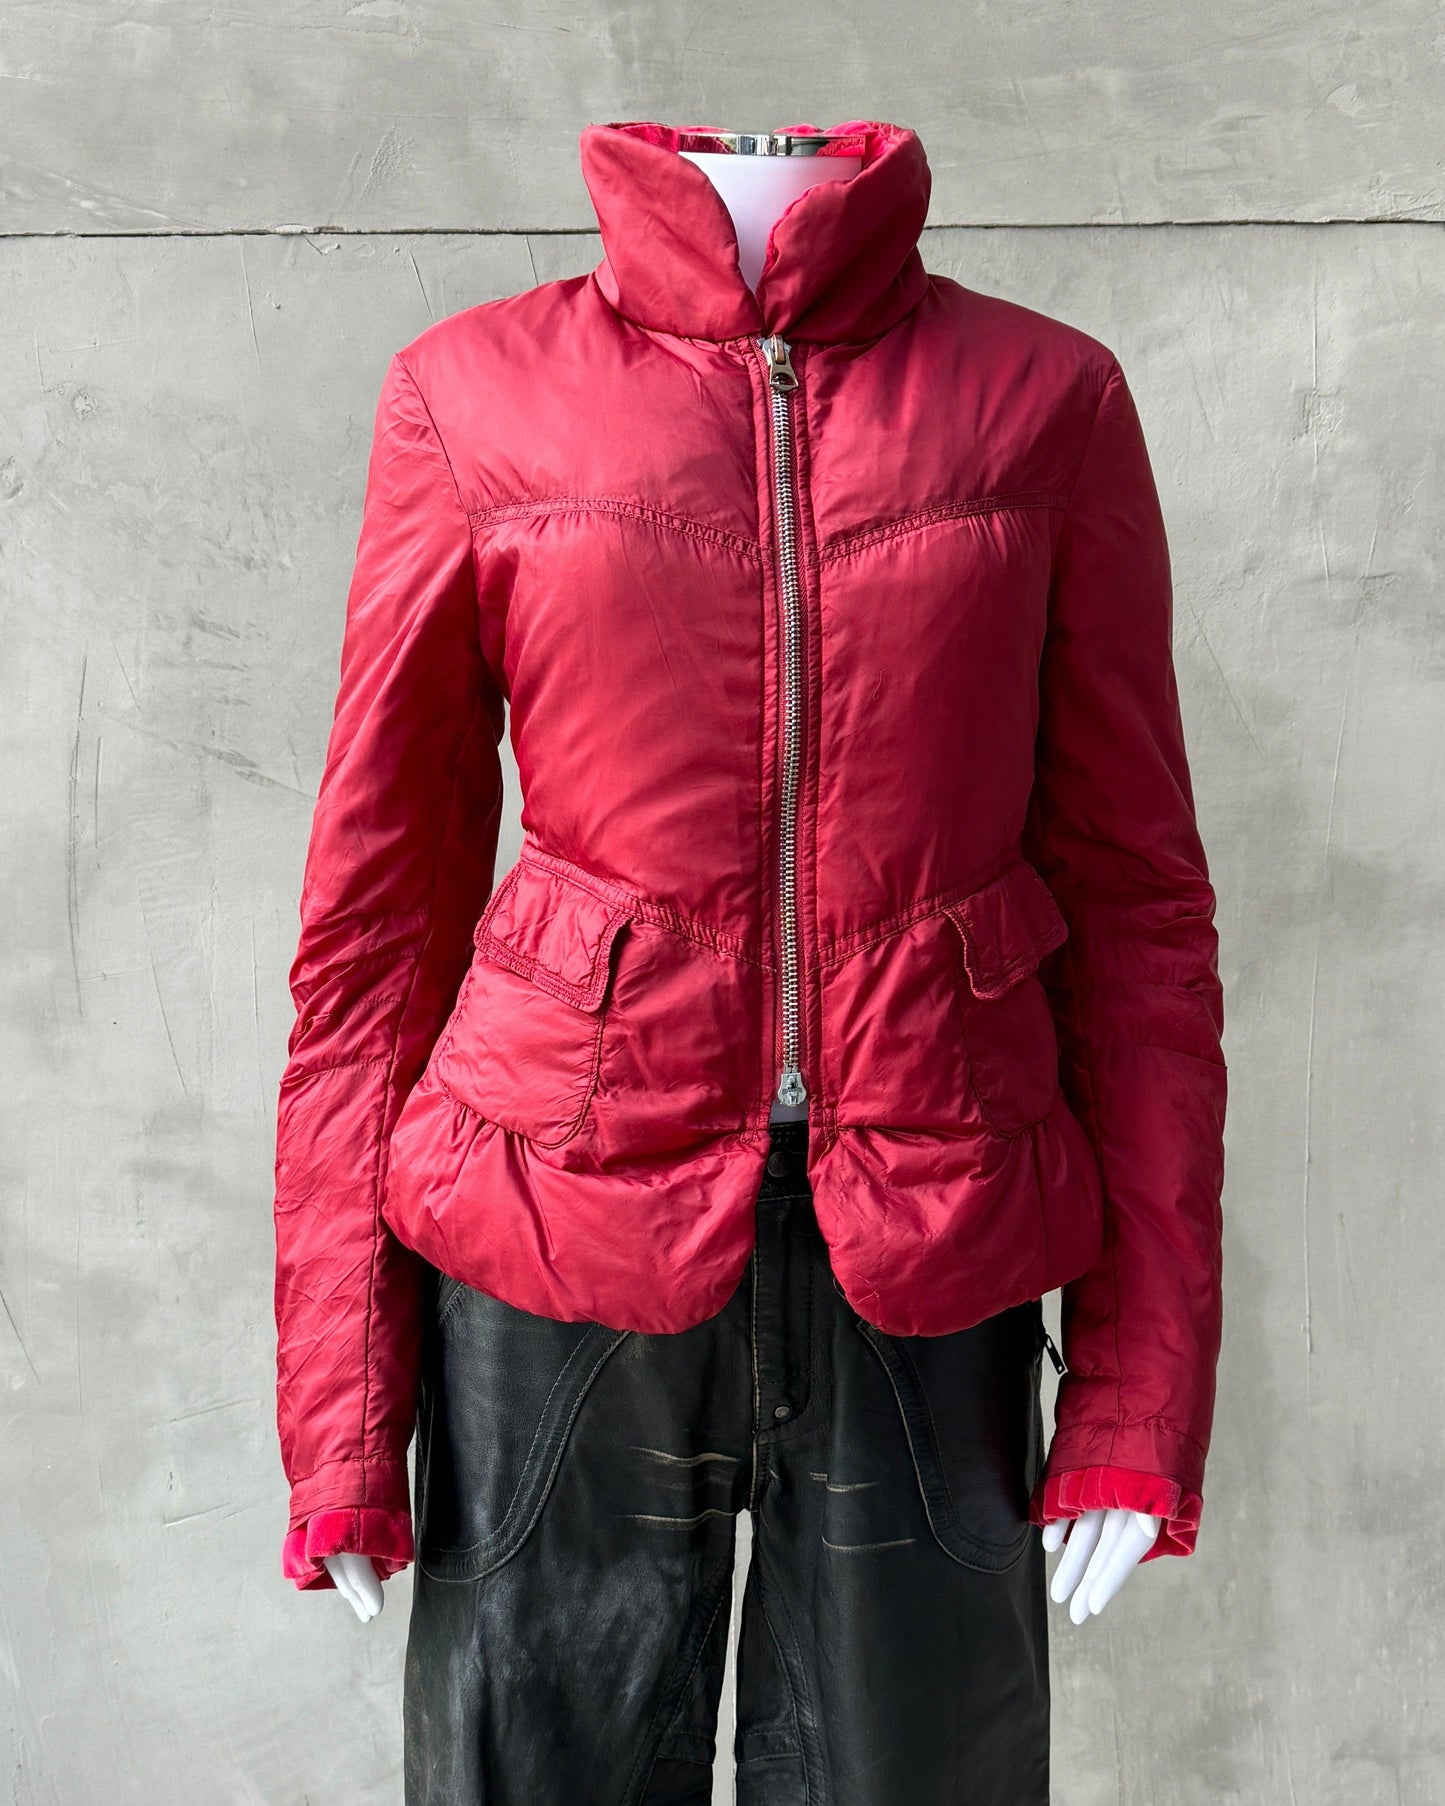 MARITHE FRANCOIS GIRBAUD MFG PUFFER JACKET - M - Known Source